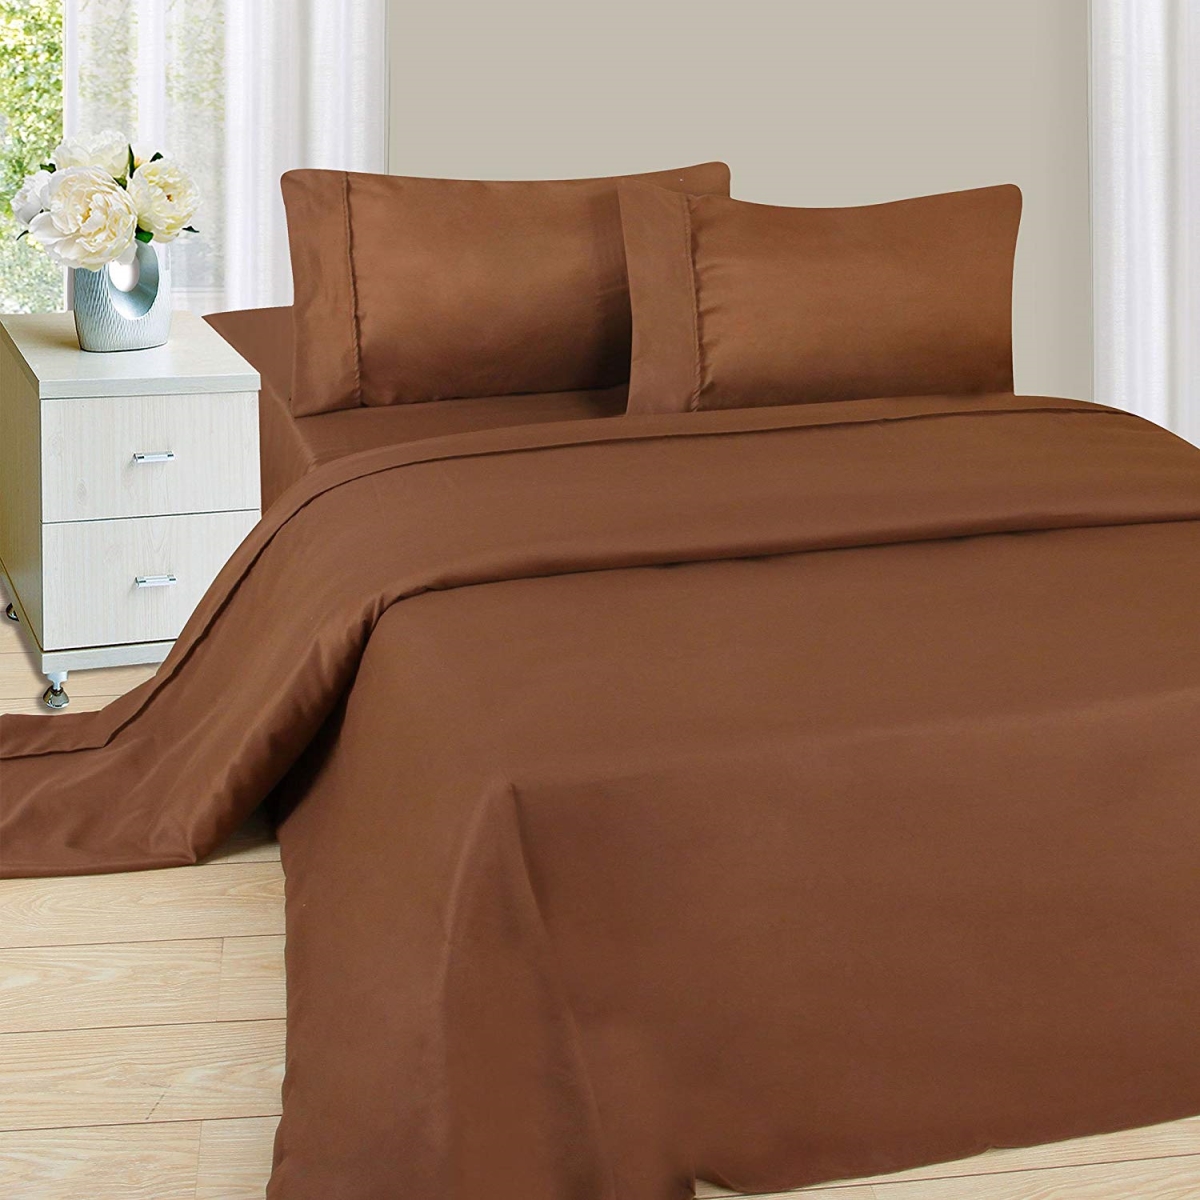 66a-05625 1200 Series Sheet Set, Twin Size & Extra Large - Chocolate